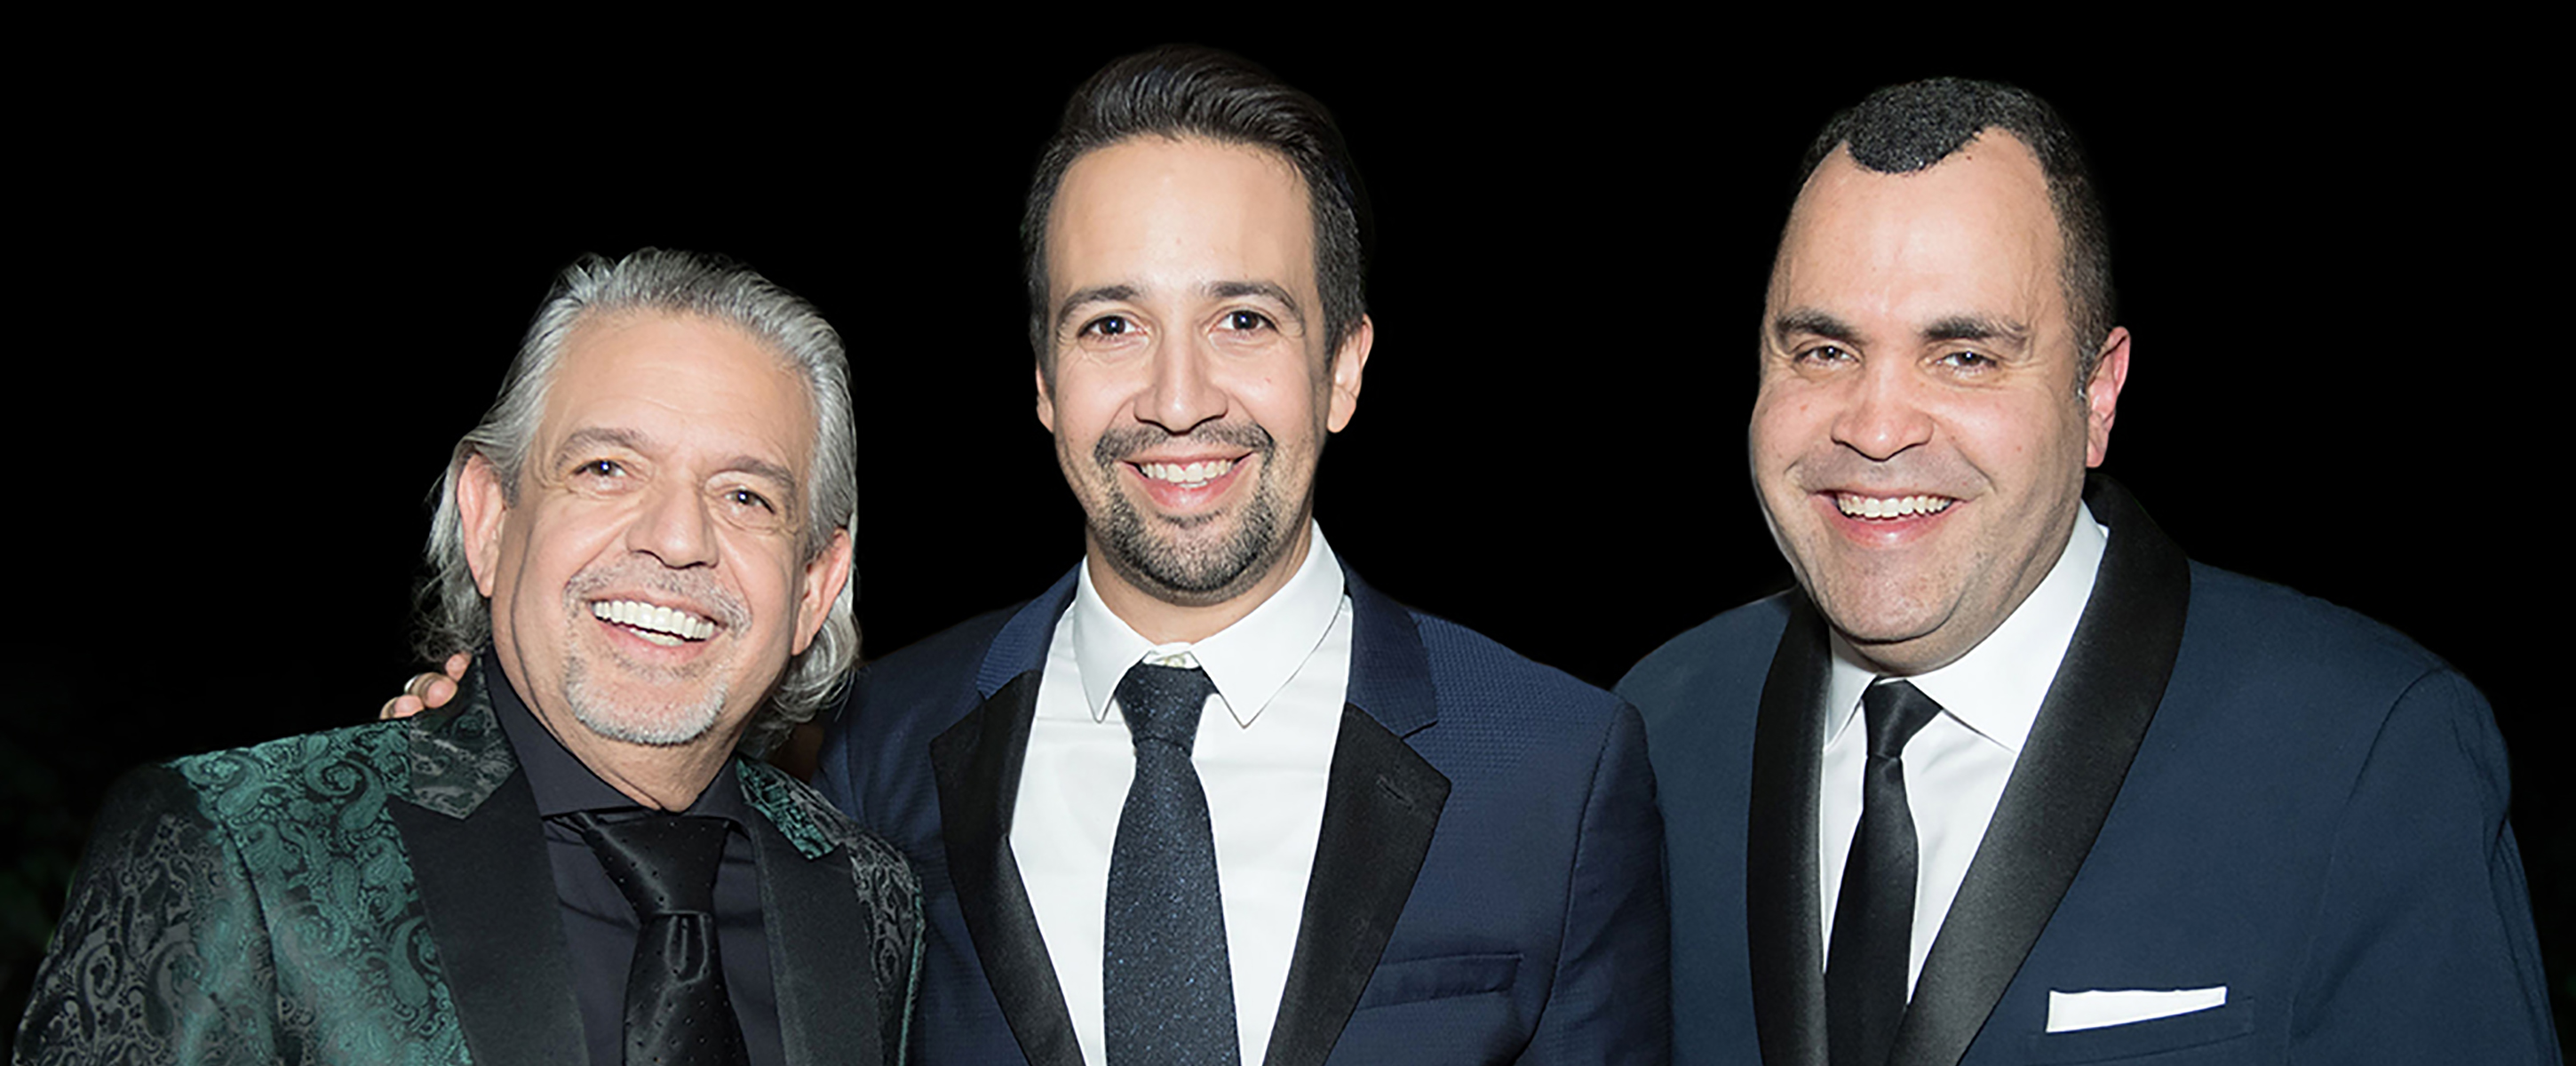 Lin-Manuel Miranda and two others standing together in tuxedos